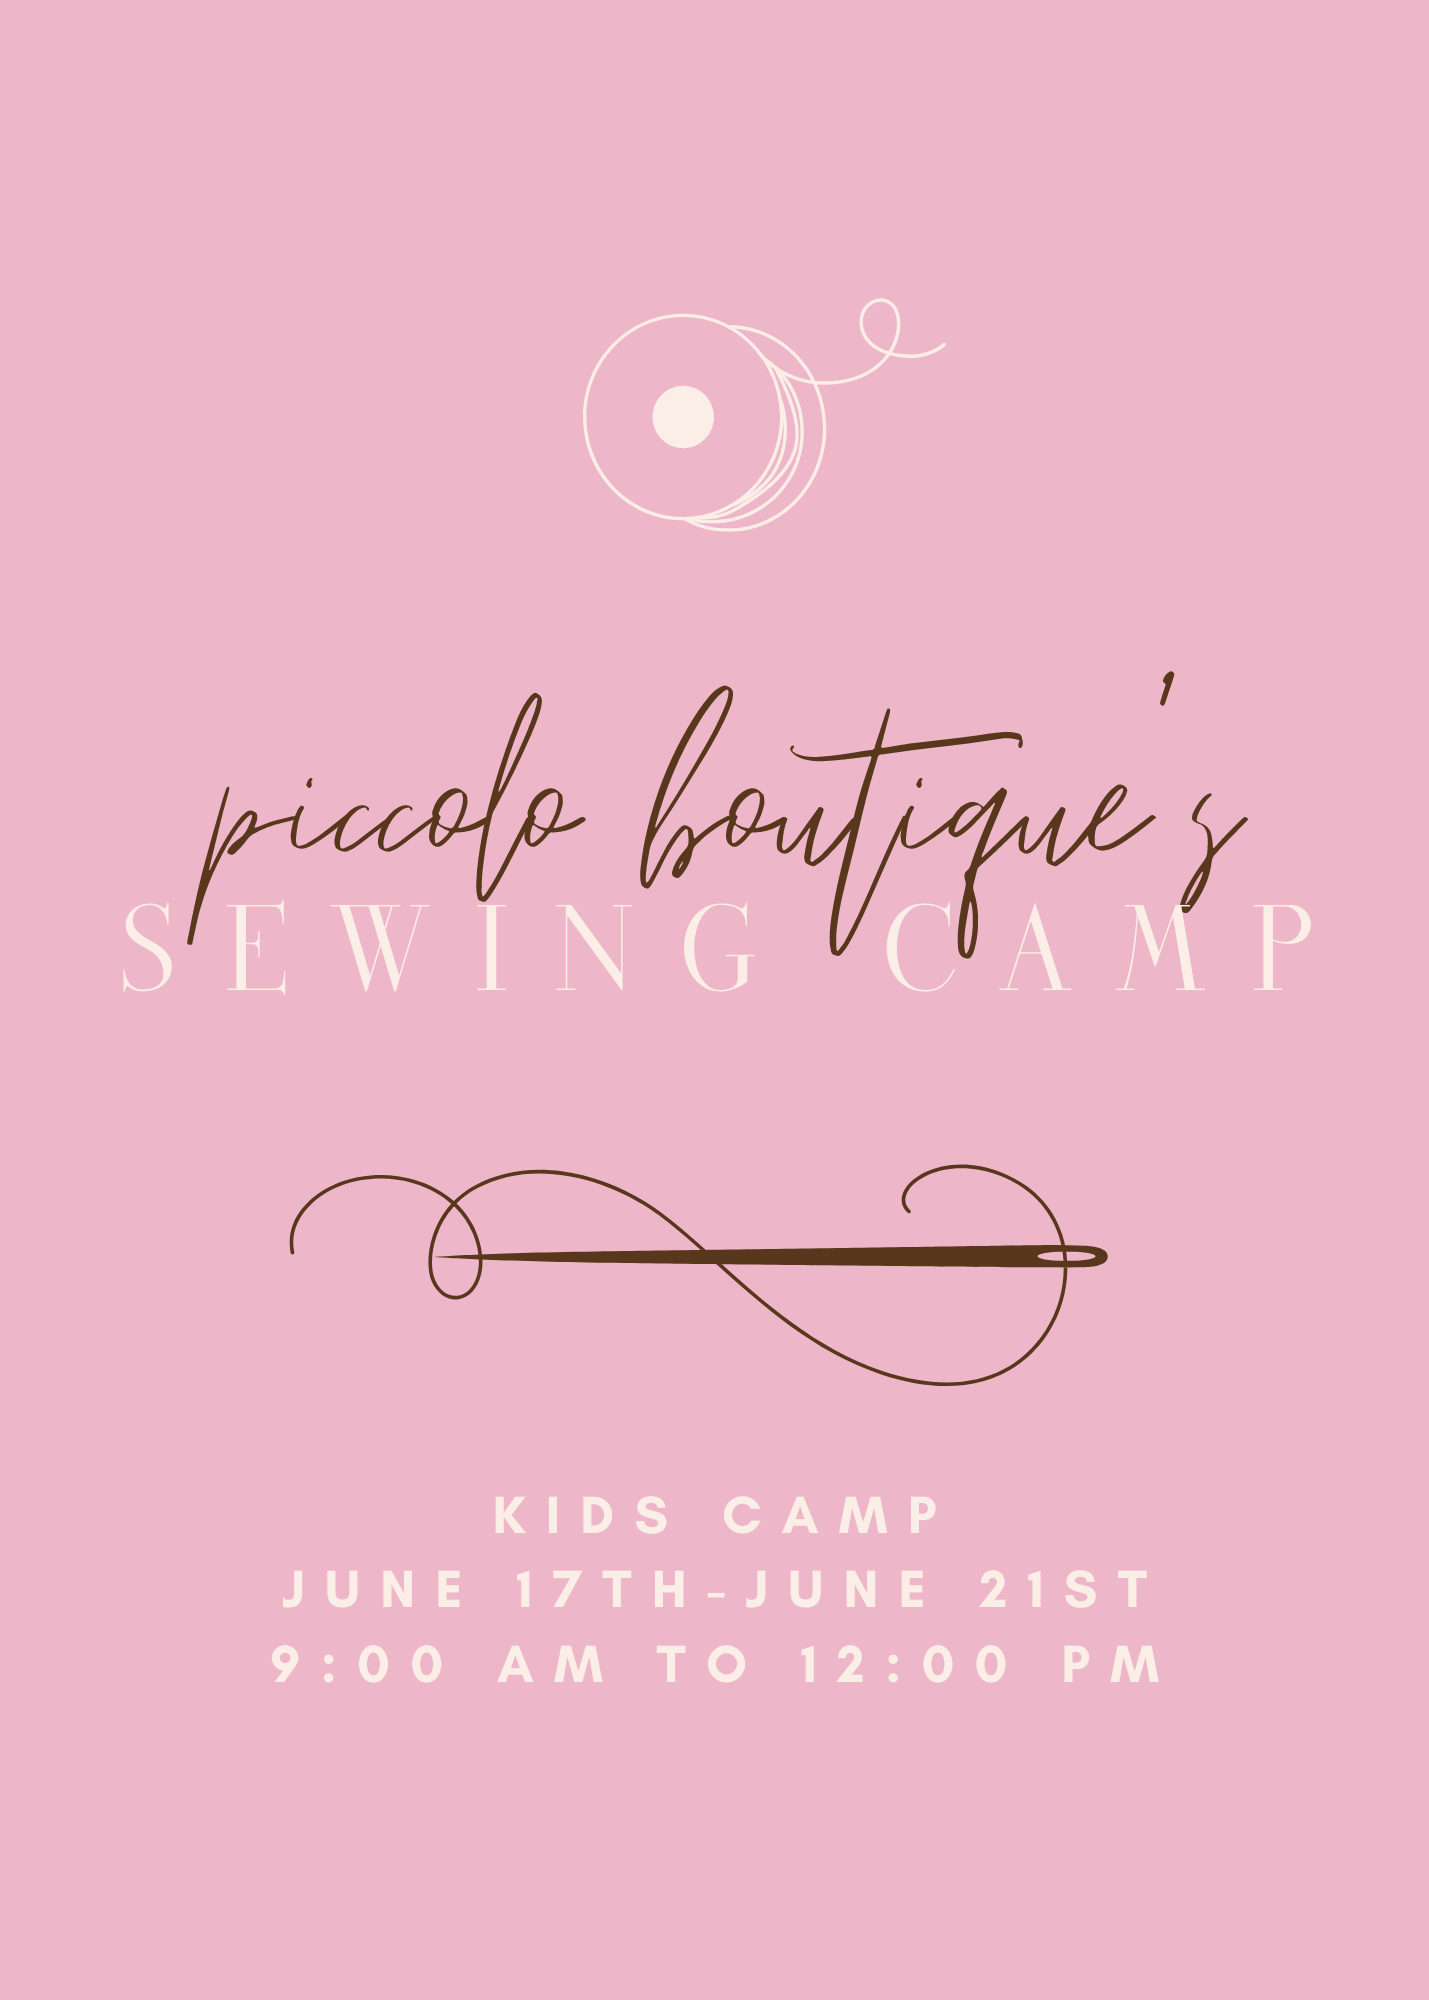 Basic Sewing For KIDS ages 8+ -June 17th-June 21st